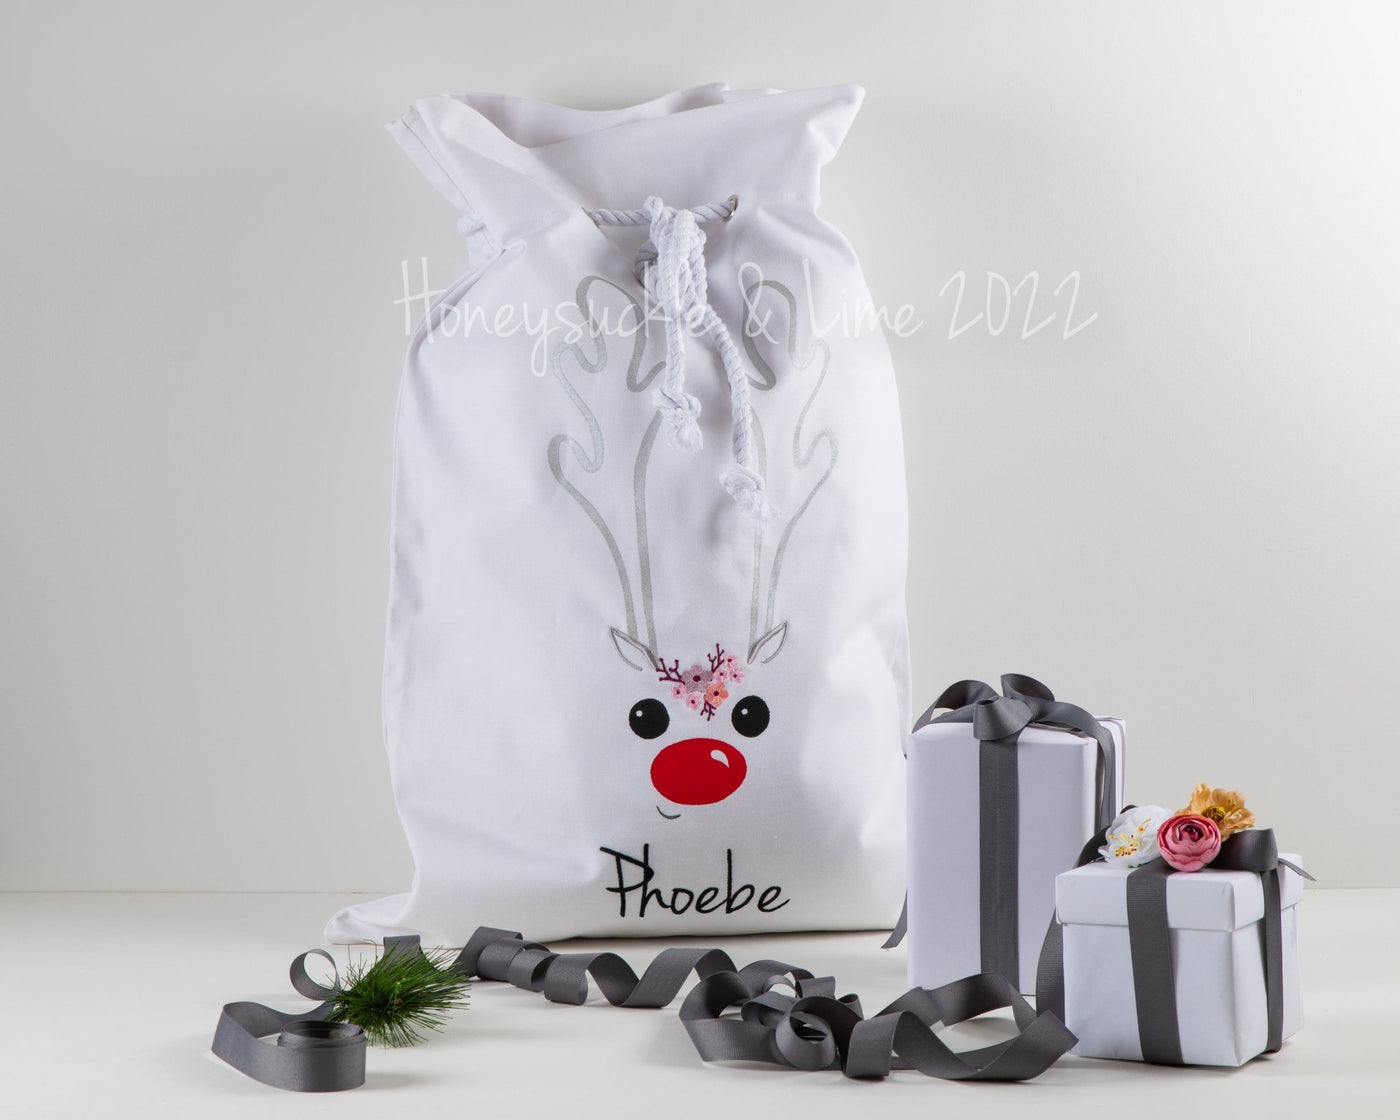 Personalised Santa Sack Reindeer Face - White with Red Nose and Flowers - Honeysuckle and Lime